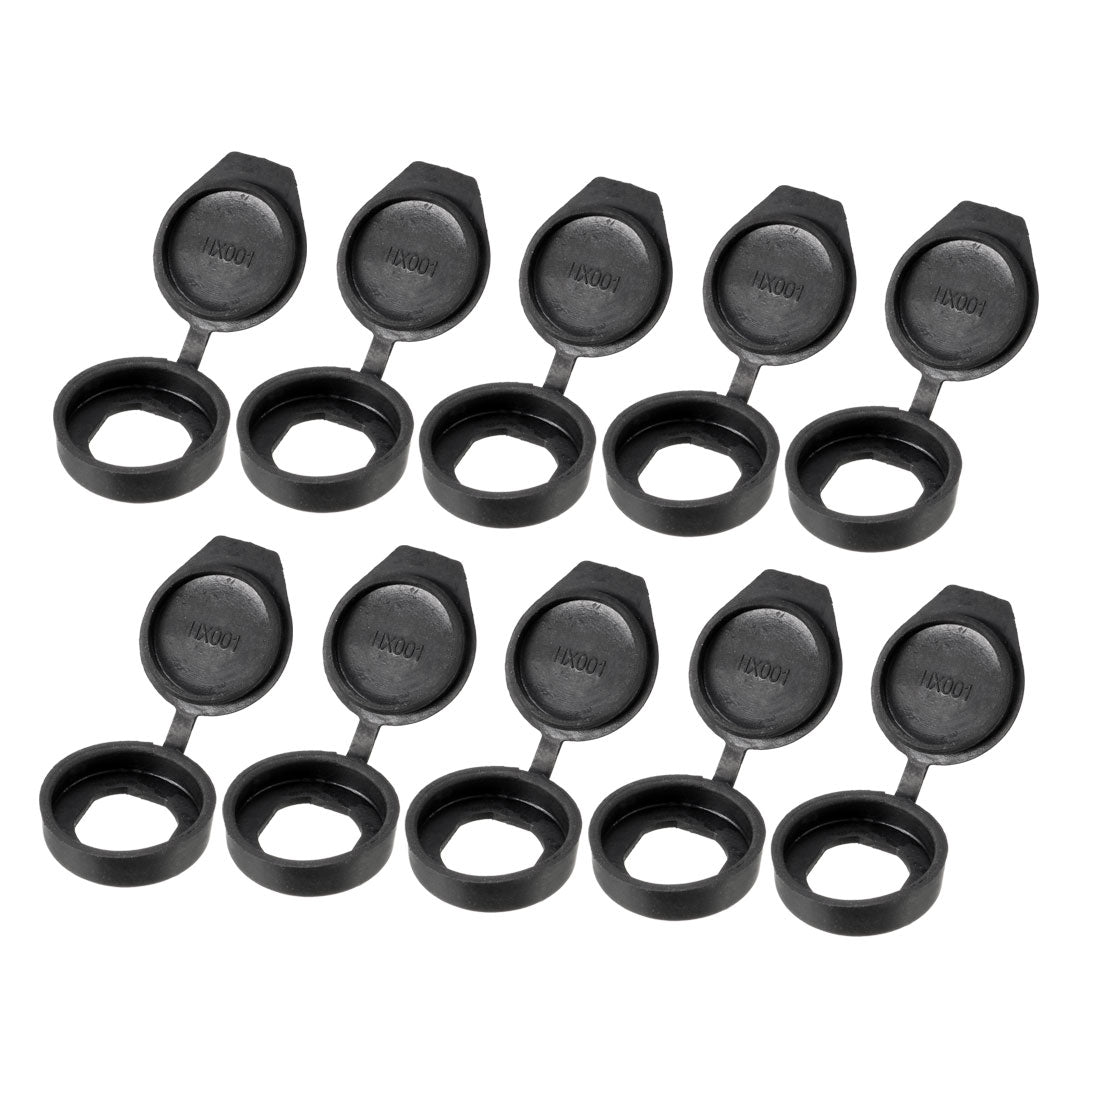 uxcell Uxcell 10 PCS Black Rubber Key Panel Cam Lock Dust Waterproof Cover Black